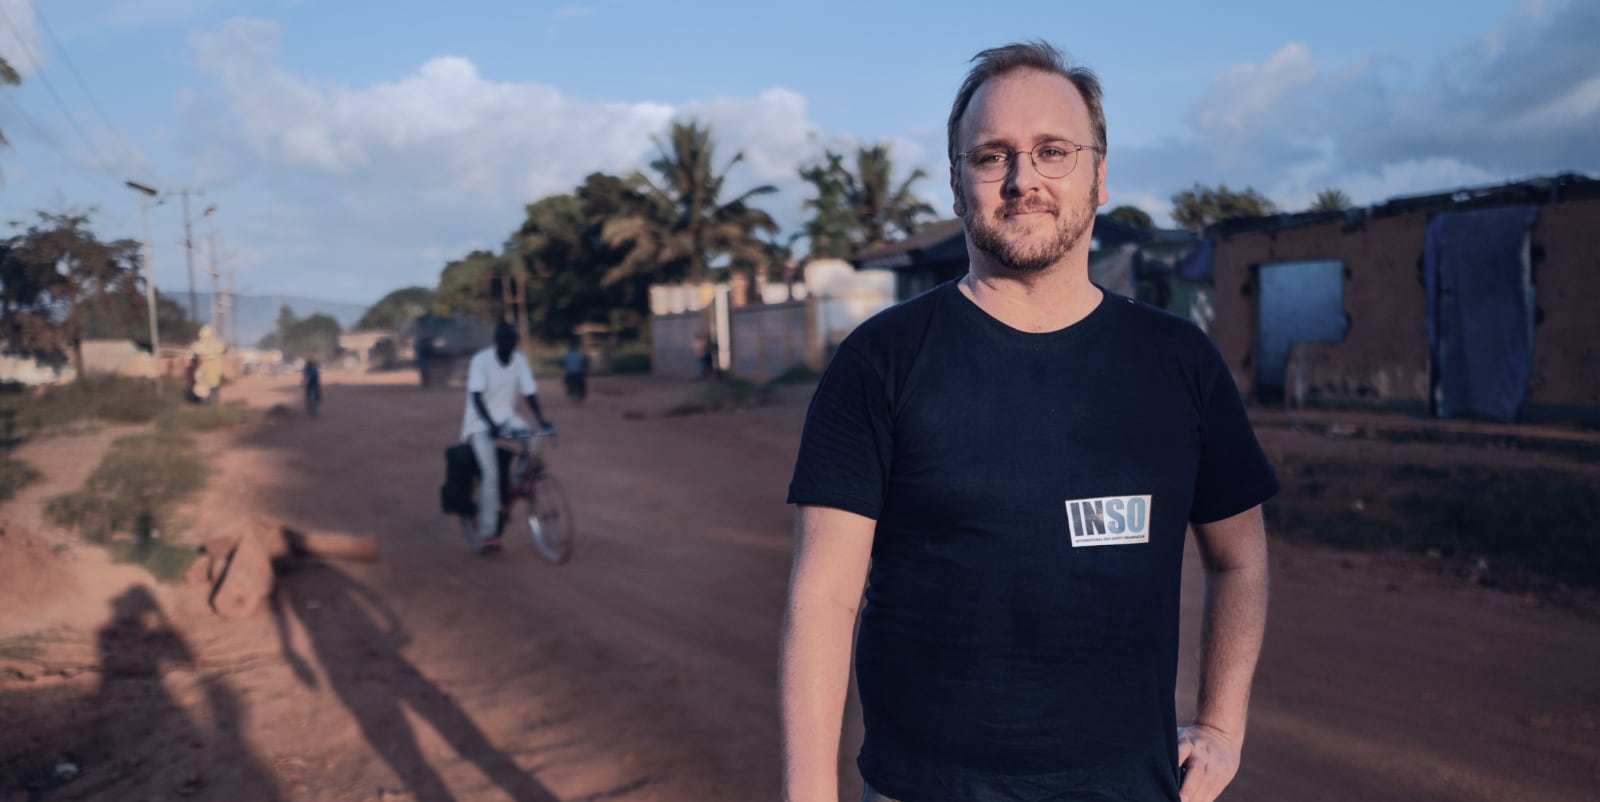 INSO Country Director Maarten Konert in the suburbs of Bangui, CAR. Credit: C. Di Roma/INSO﻿